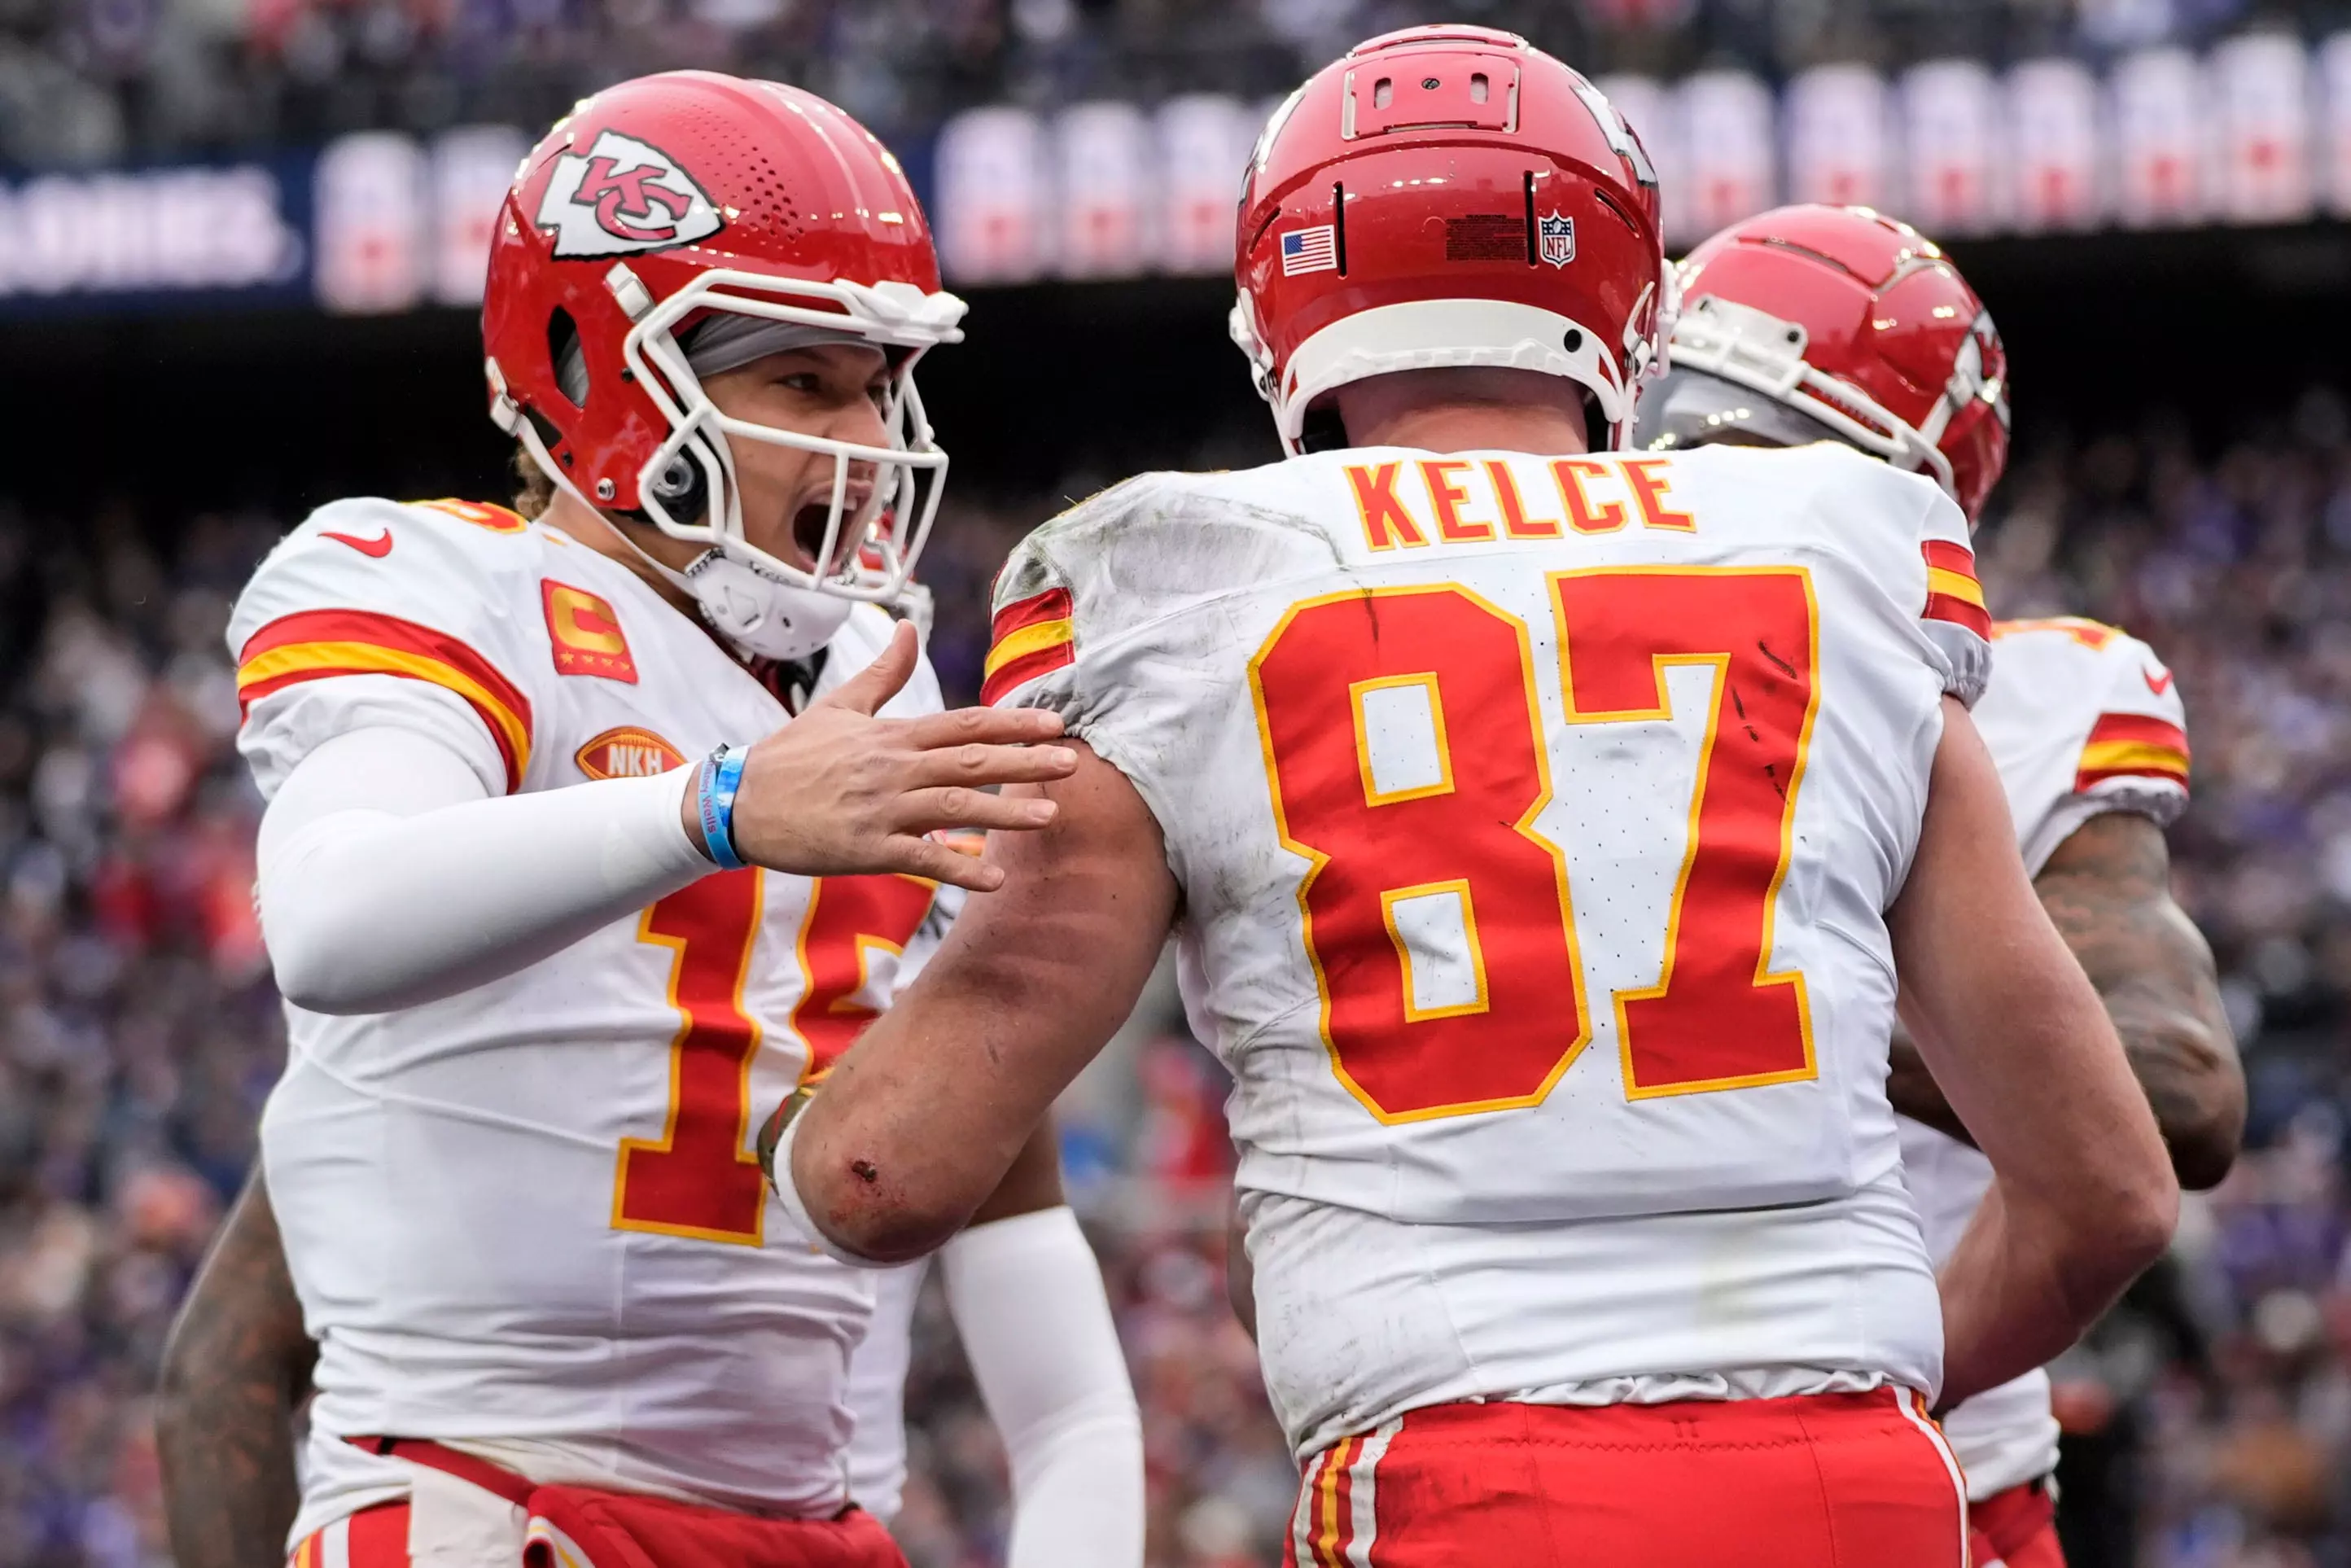 Quarterback Patrick Mahomes connected with tight end Travis Kelce 11 times for 116 yards and a touchdown in the Chiefs